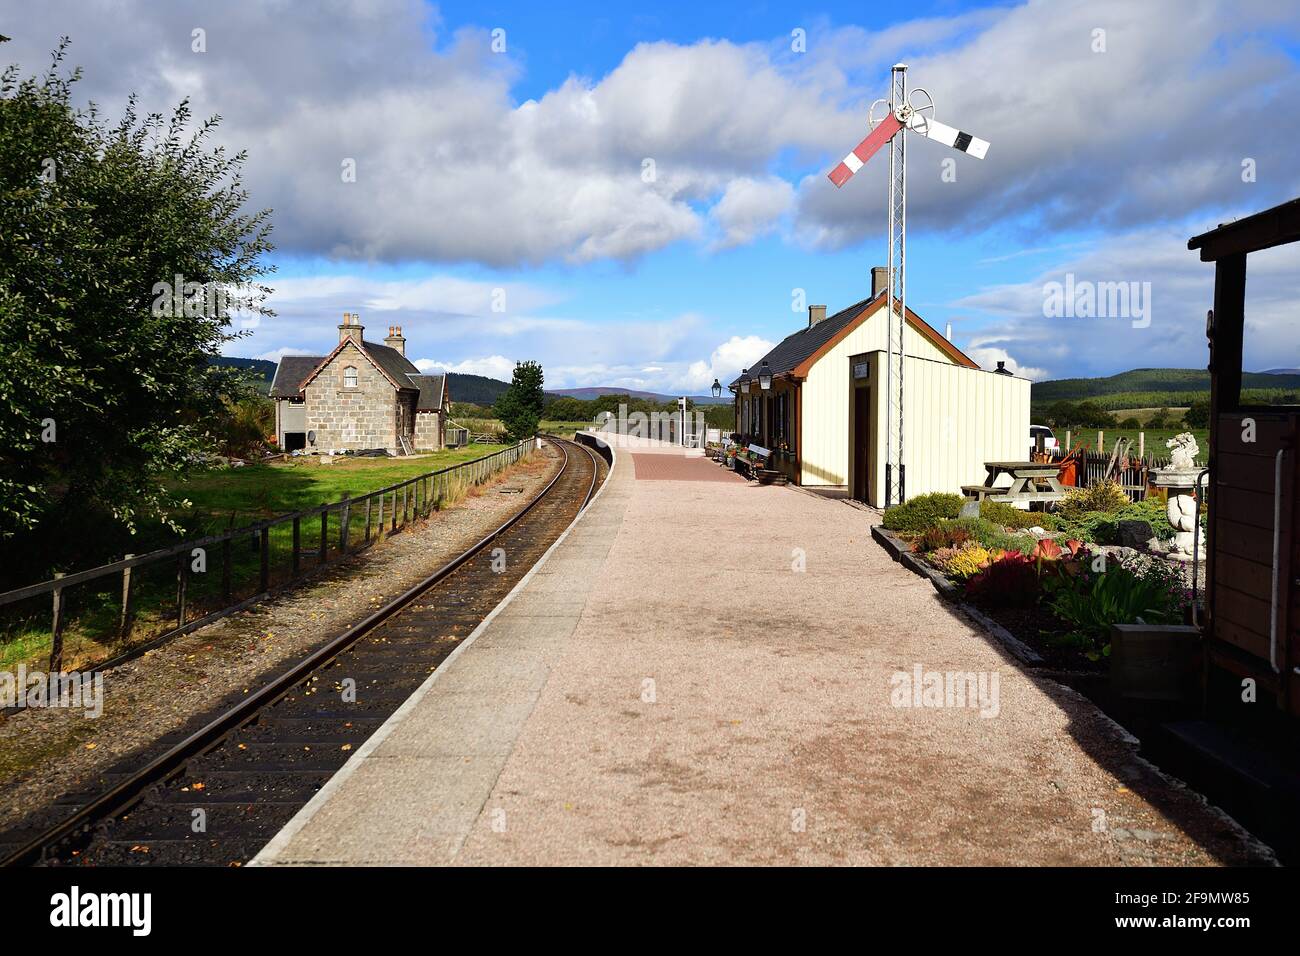 Broomhill, Scotland, United Kingdom. The railroad station and platform at Broomhill, served by the Strathspey Railway. Stock Photo